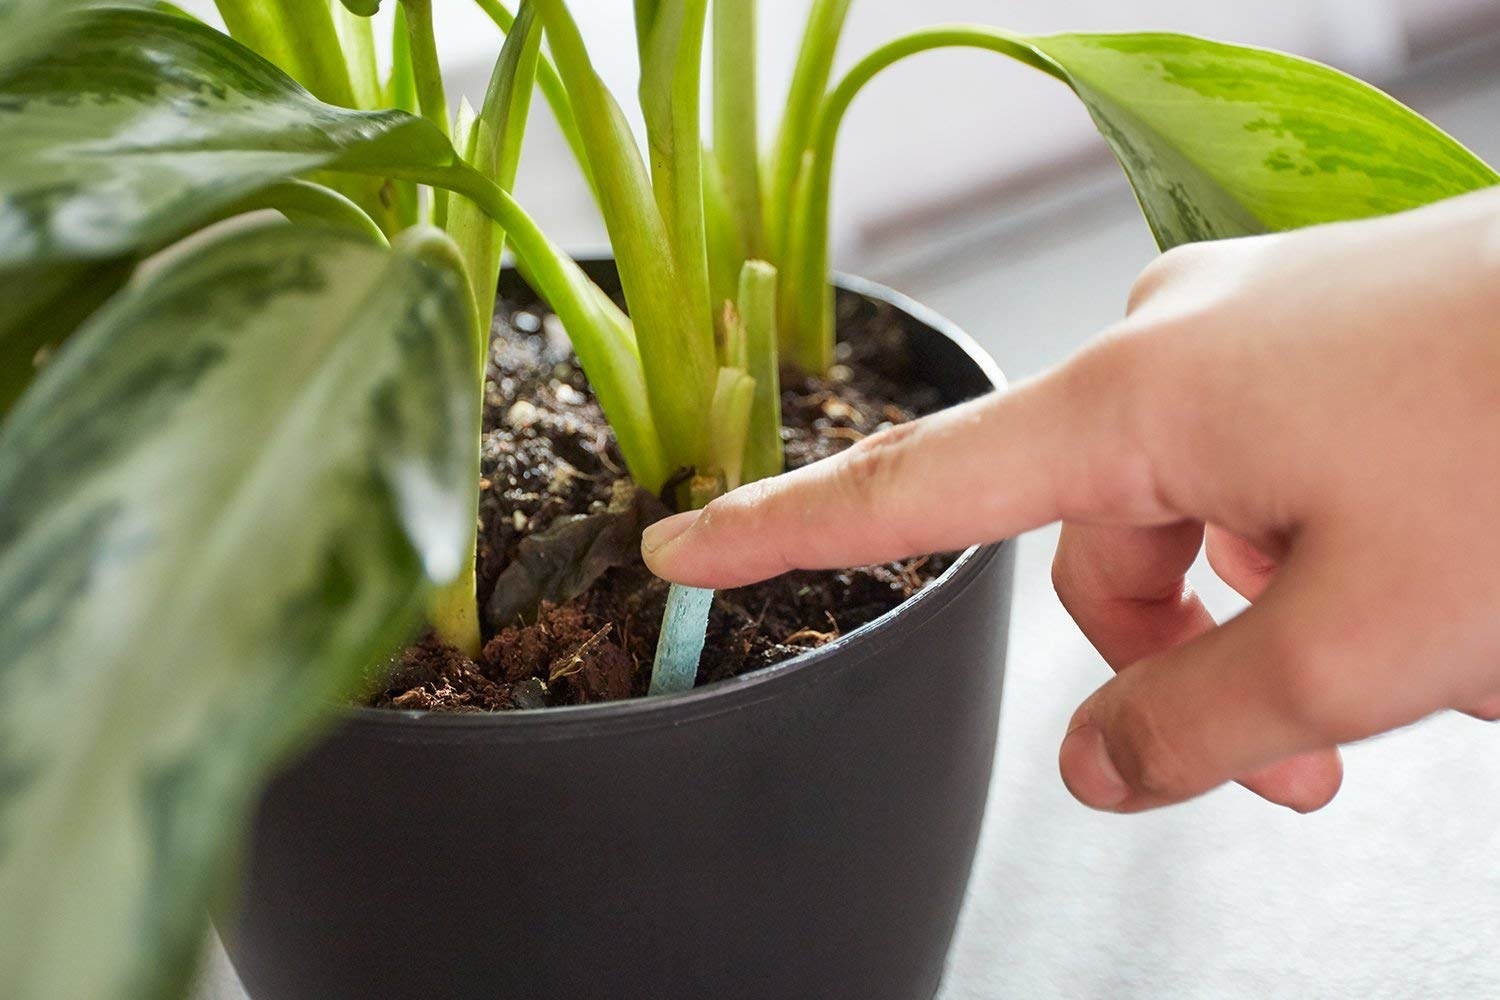 A model pushing a green pellet into a potted plant&#x27;s soil 